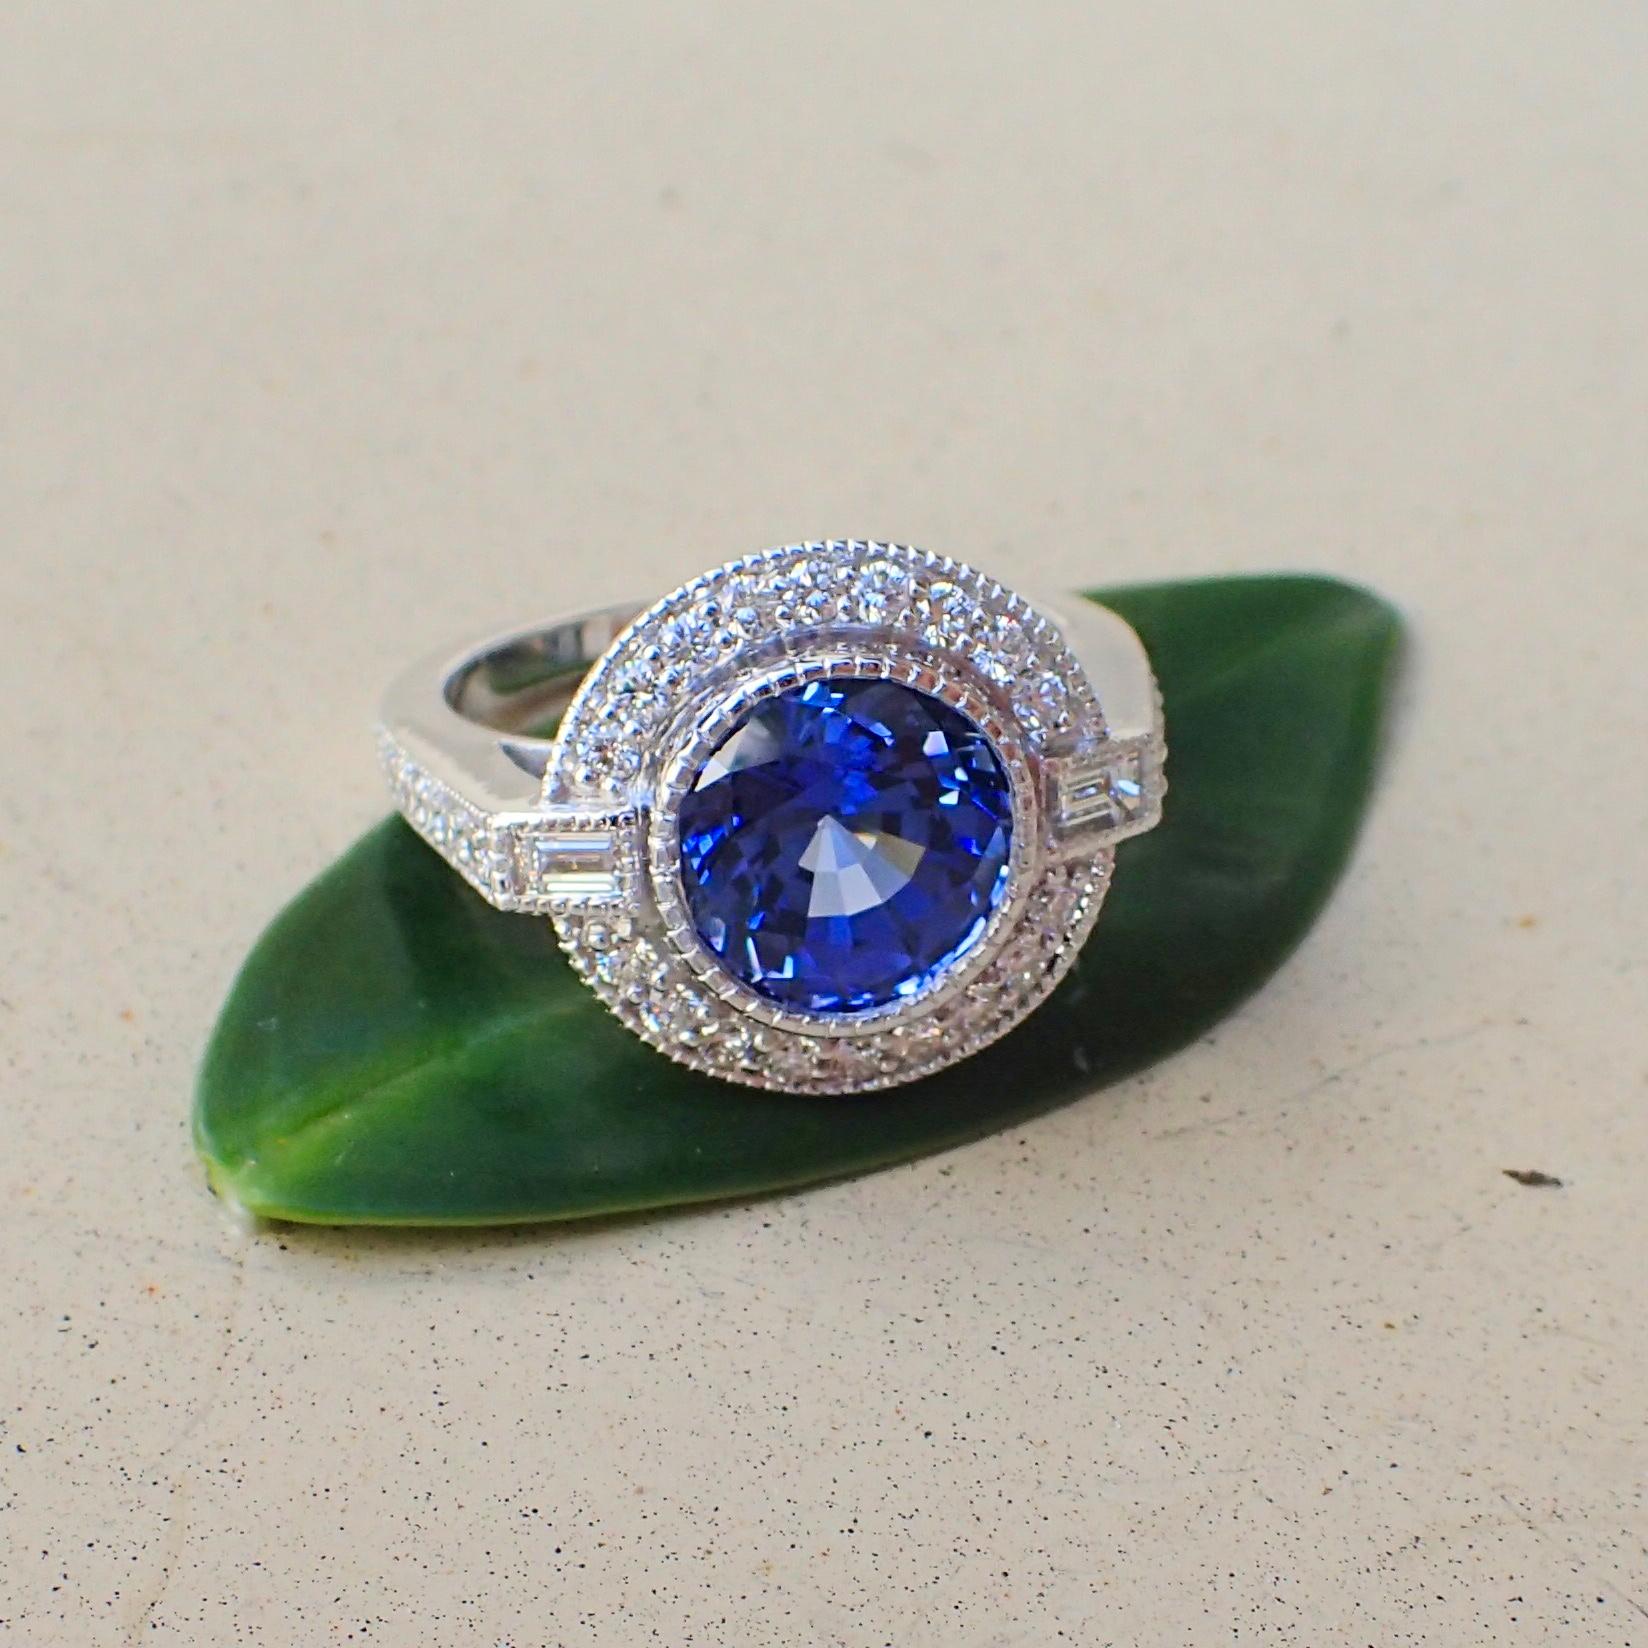 18 Karat Gold Ring with 3.93 Carat Chatham Sapphire and 0.61 Carat of Diamond For Sale 1